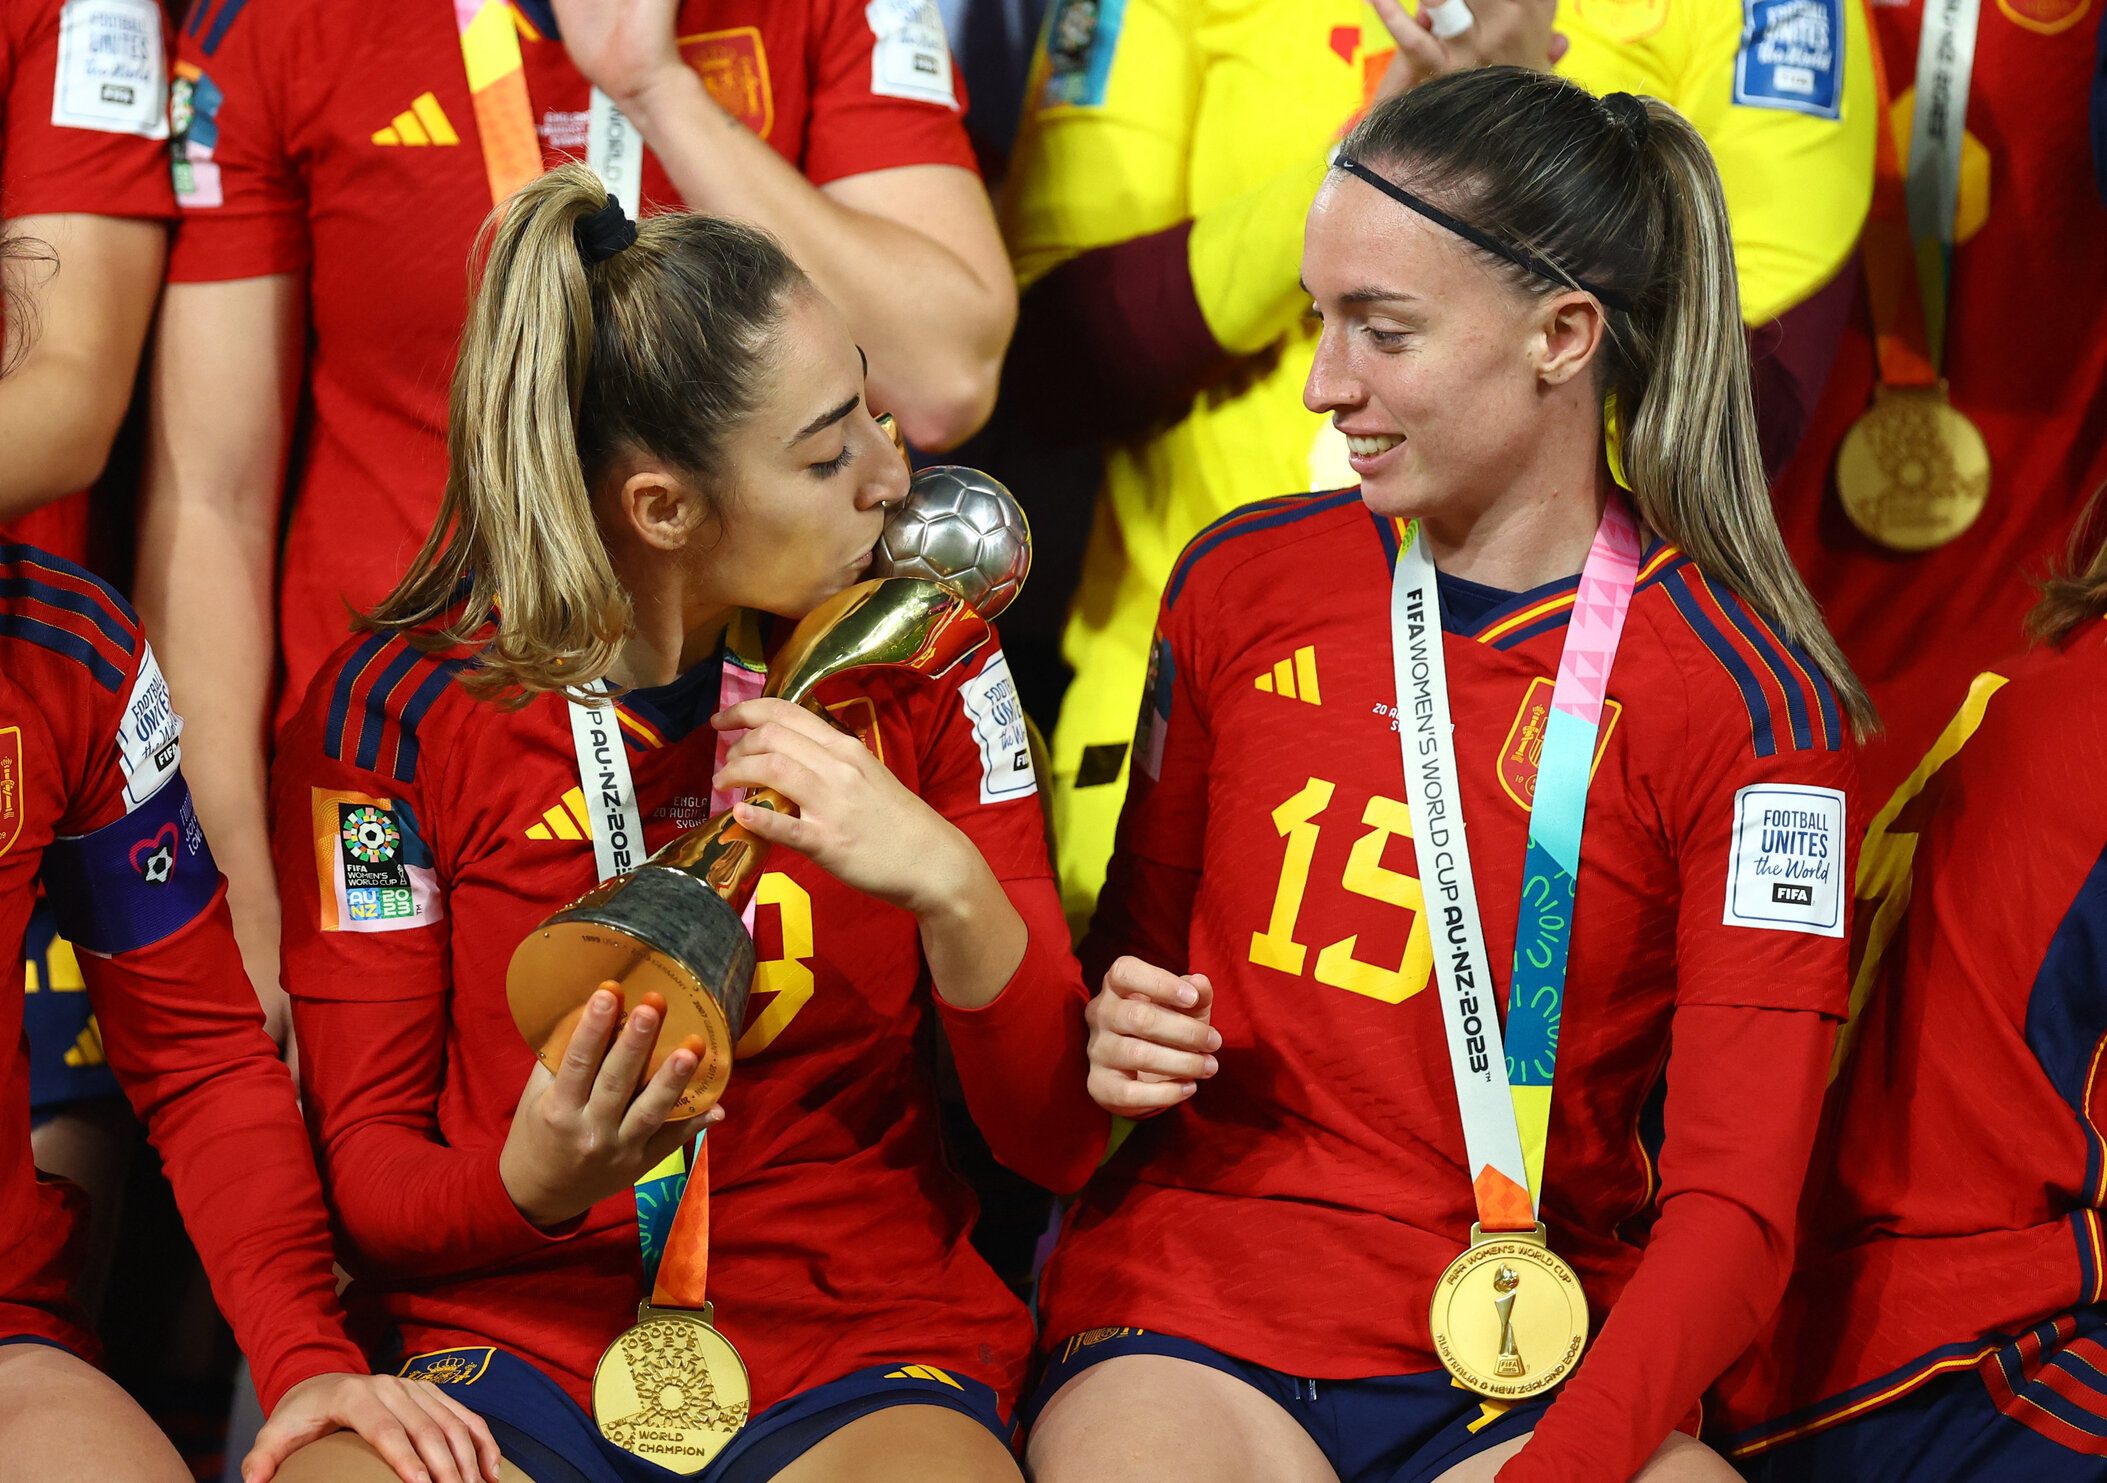 Spain’s women football players say boycott remains, deepening crisis